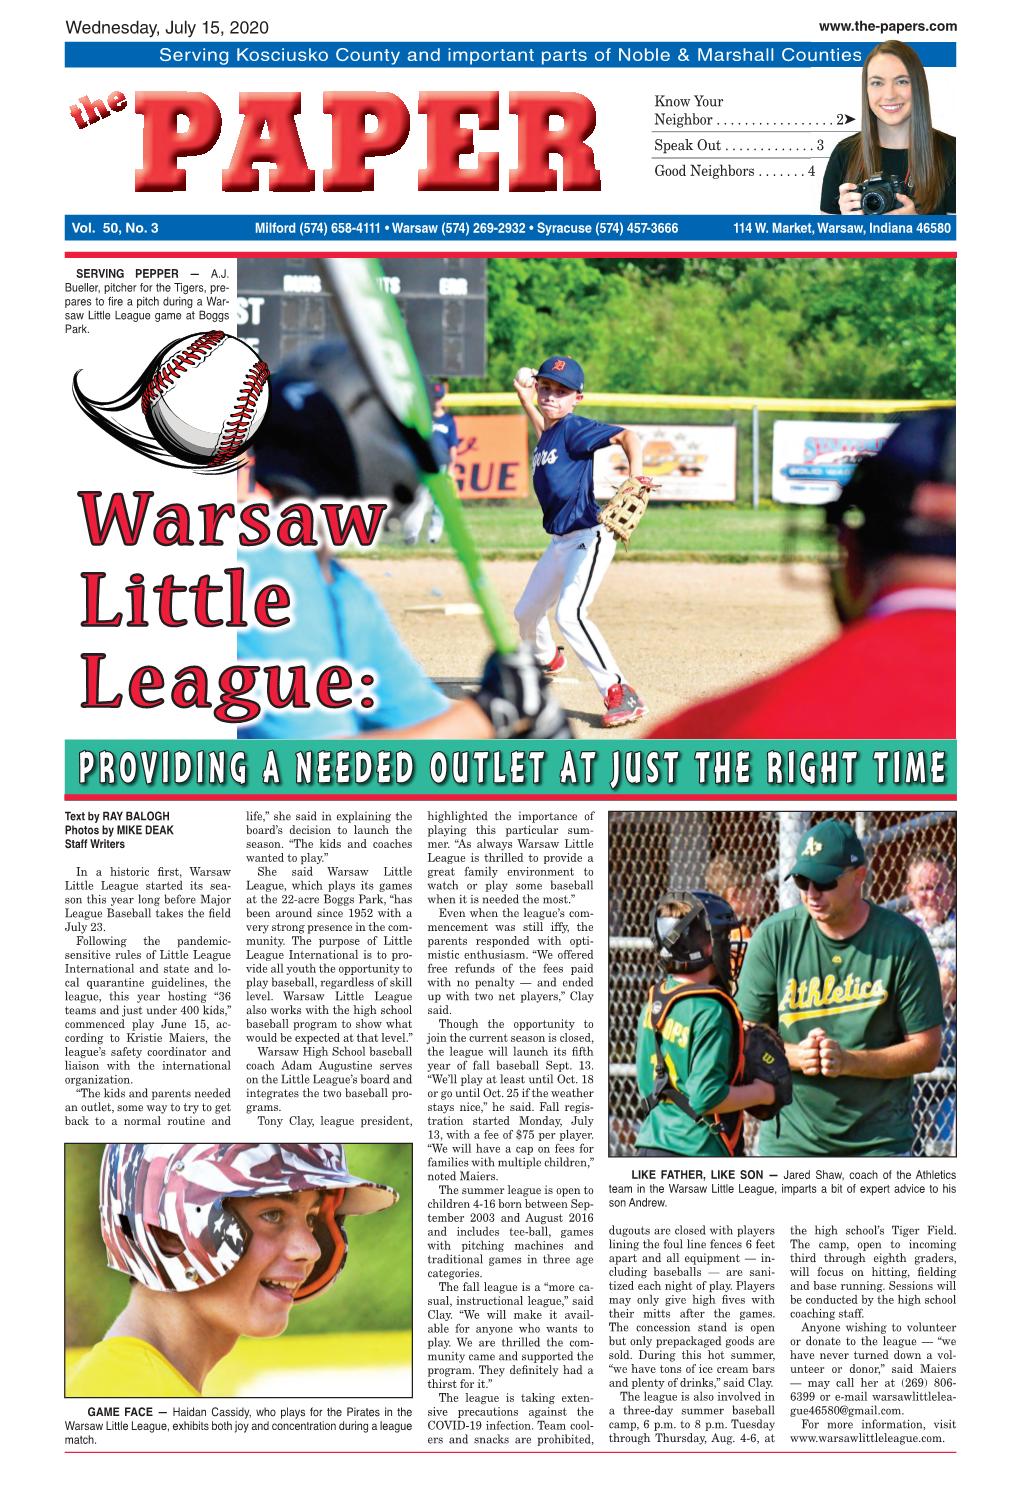 Warsaw Little League: PROVIDING a NEEDED OUTLET at JUST the RIGHT TIME